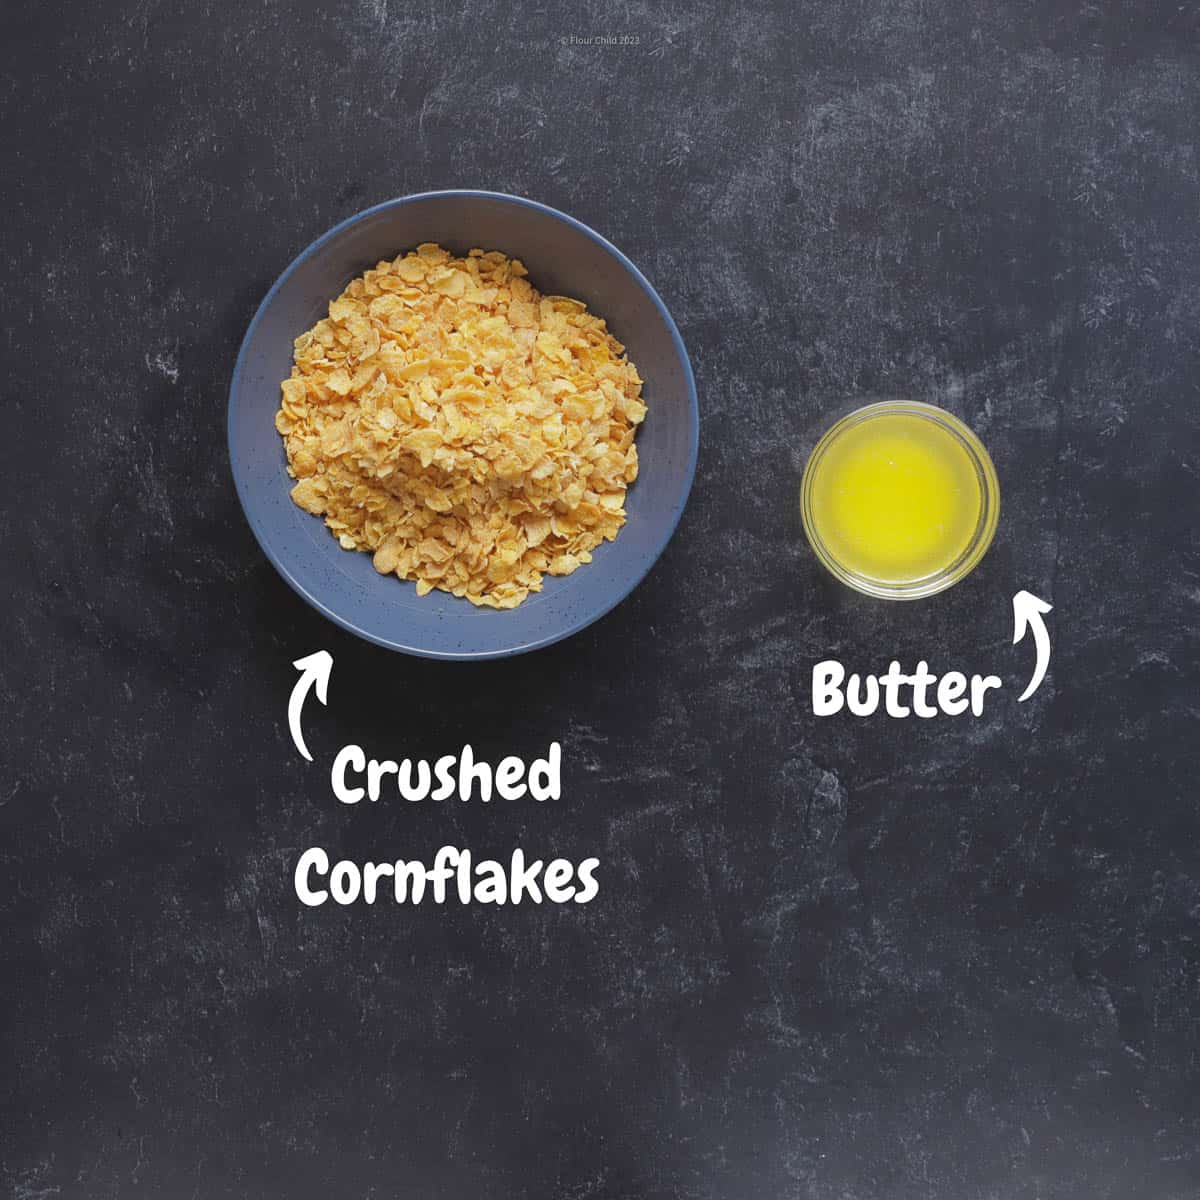 Two ingredients for cheesy potato casserole topping laid out on board